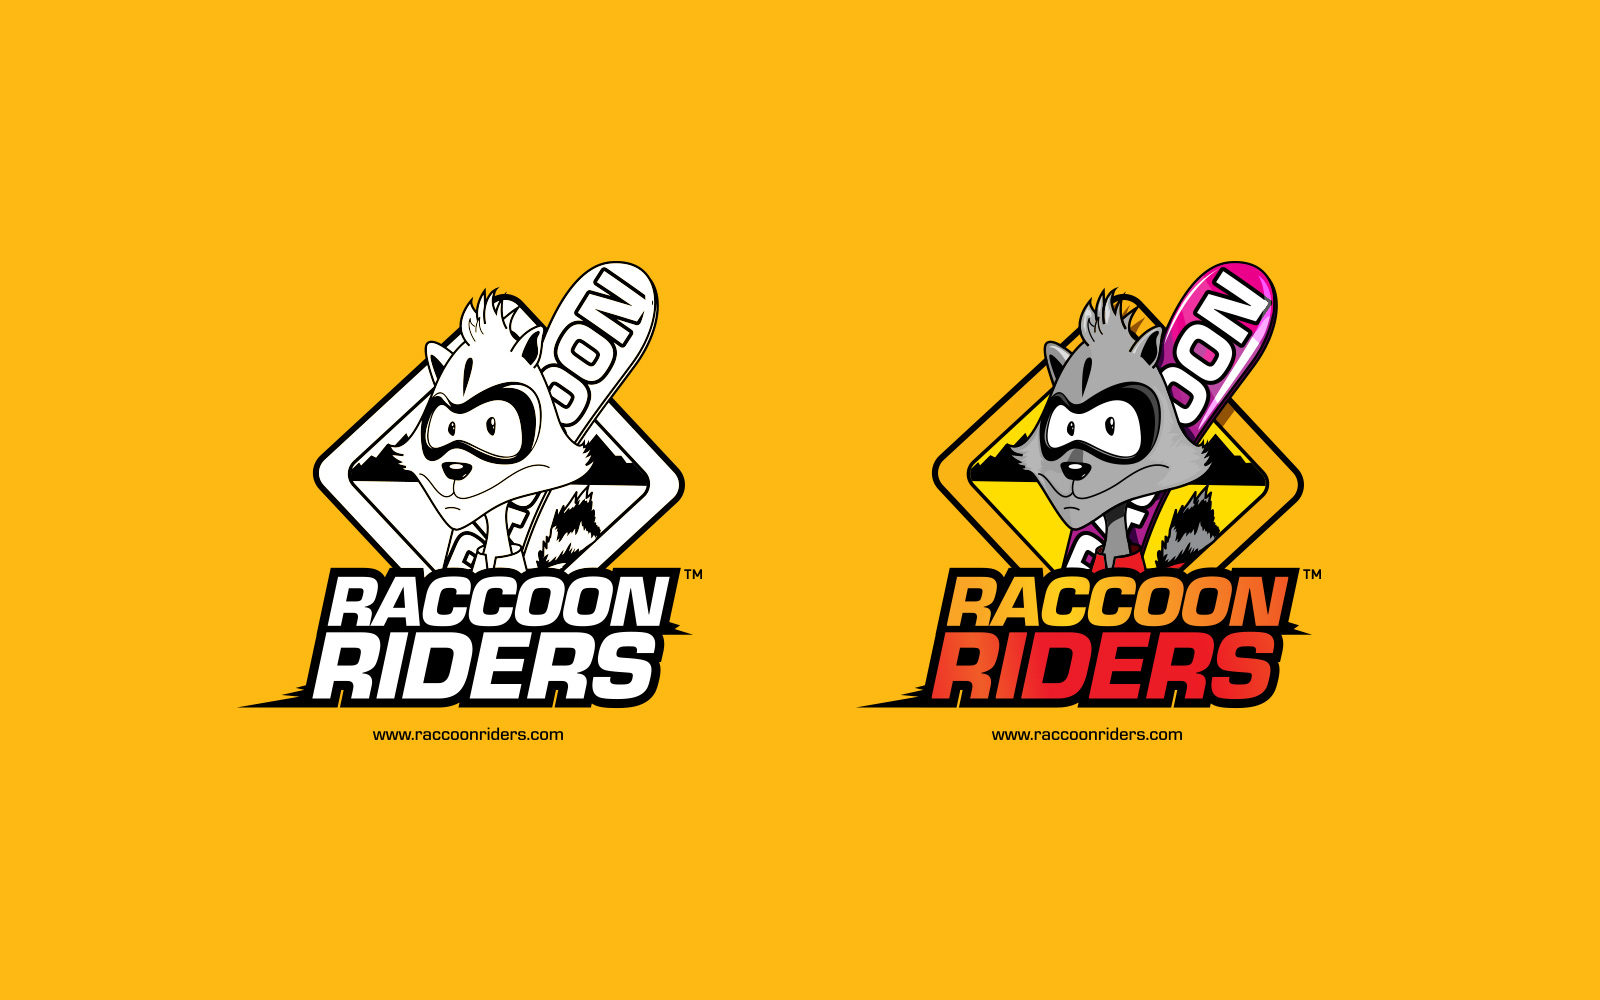 RACCOON_RIDERS_IMAGES2